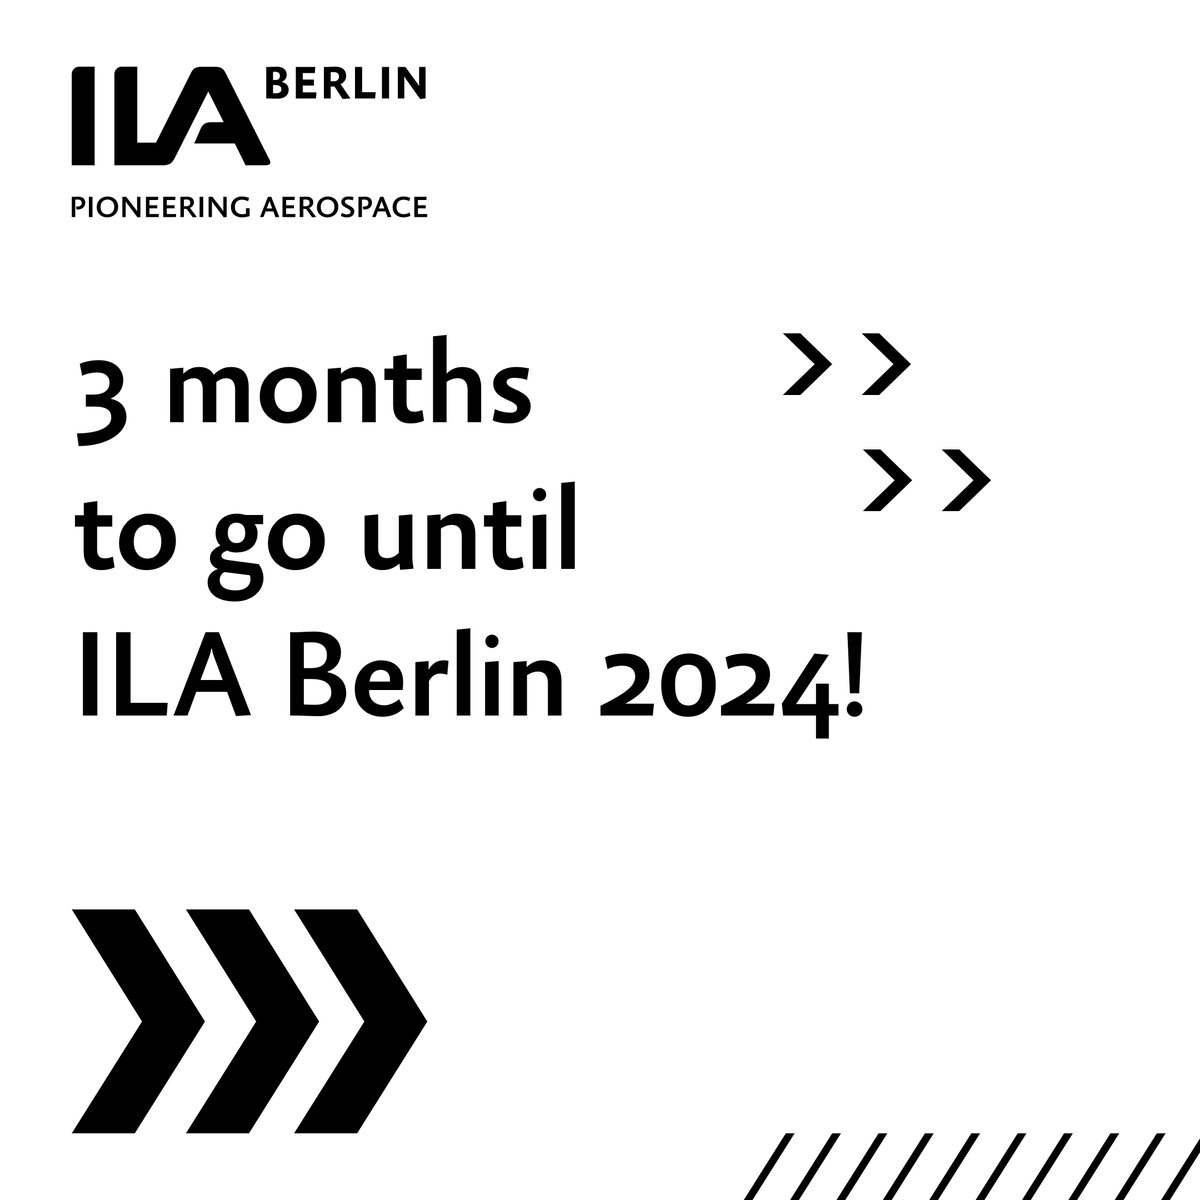 Excitement is soaring high as we countdown to #ILA24 – only 3 months left! Innovators and #aerospace enthusiasts, mark your calendars! 🗓️ @bdlipresse @MesseBerlin #PioneeringAerospace